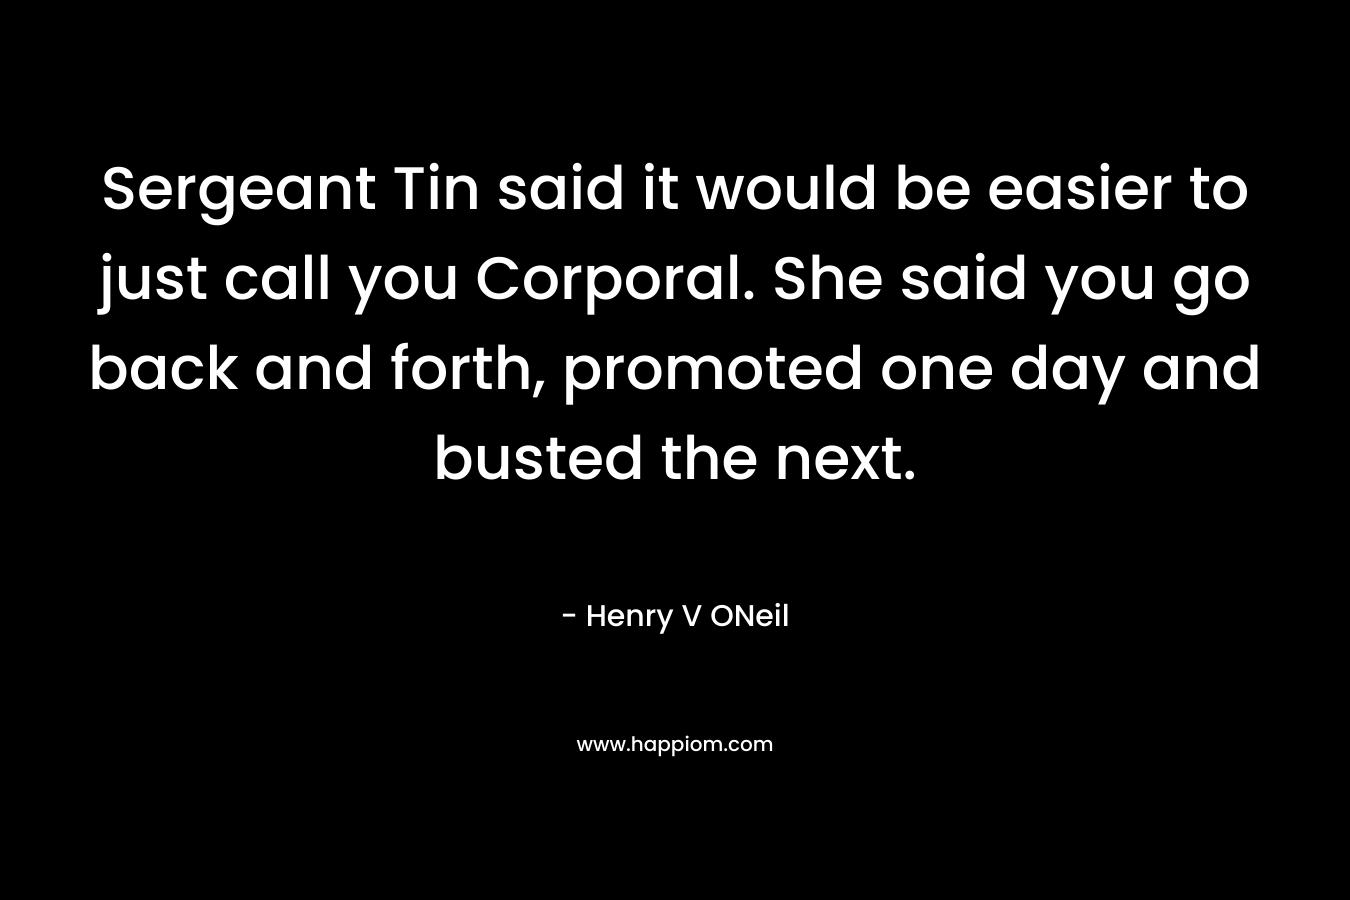 Sergeant Tin said it would be easier to just call you Corporal. She said you go back and forth, promoted one day and busted the next. – Henry V ONeil